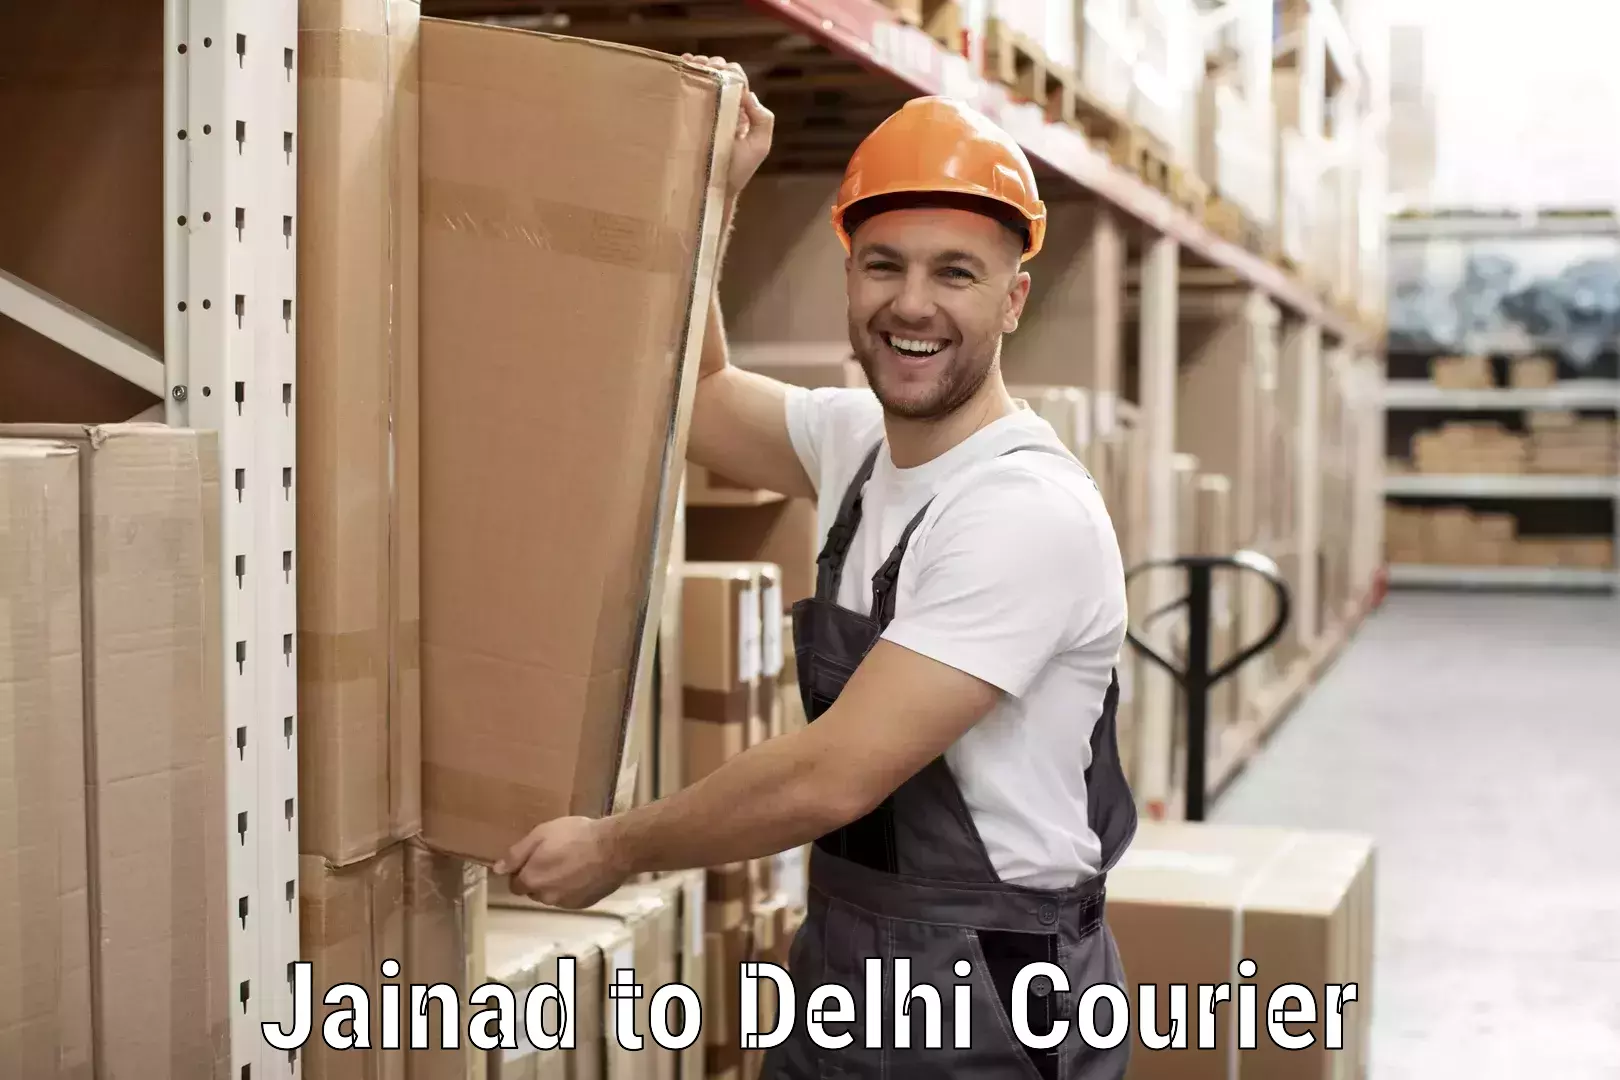 Courier service partnerships Jainad to NCR